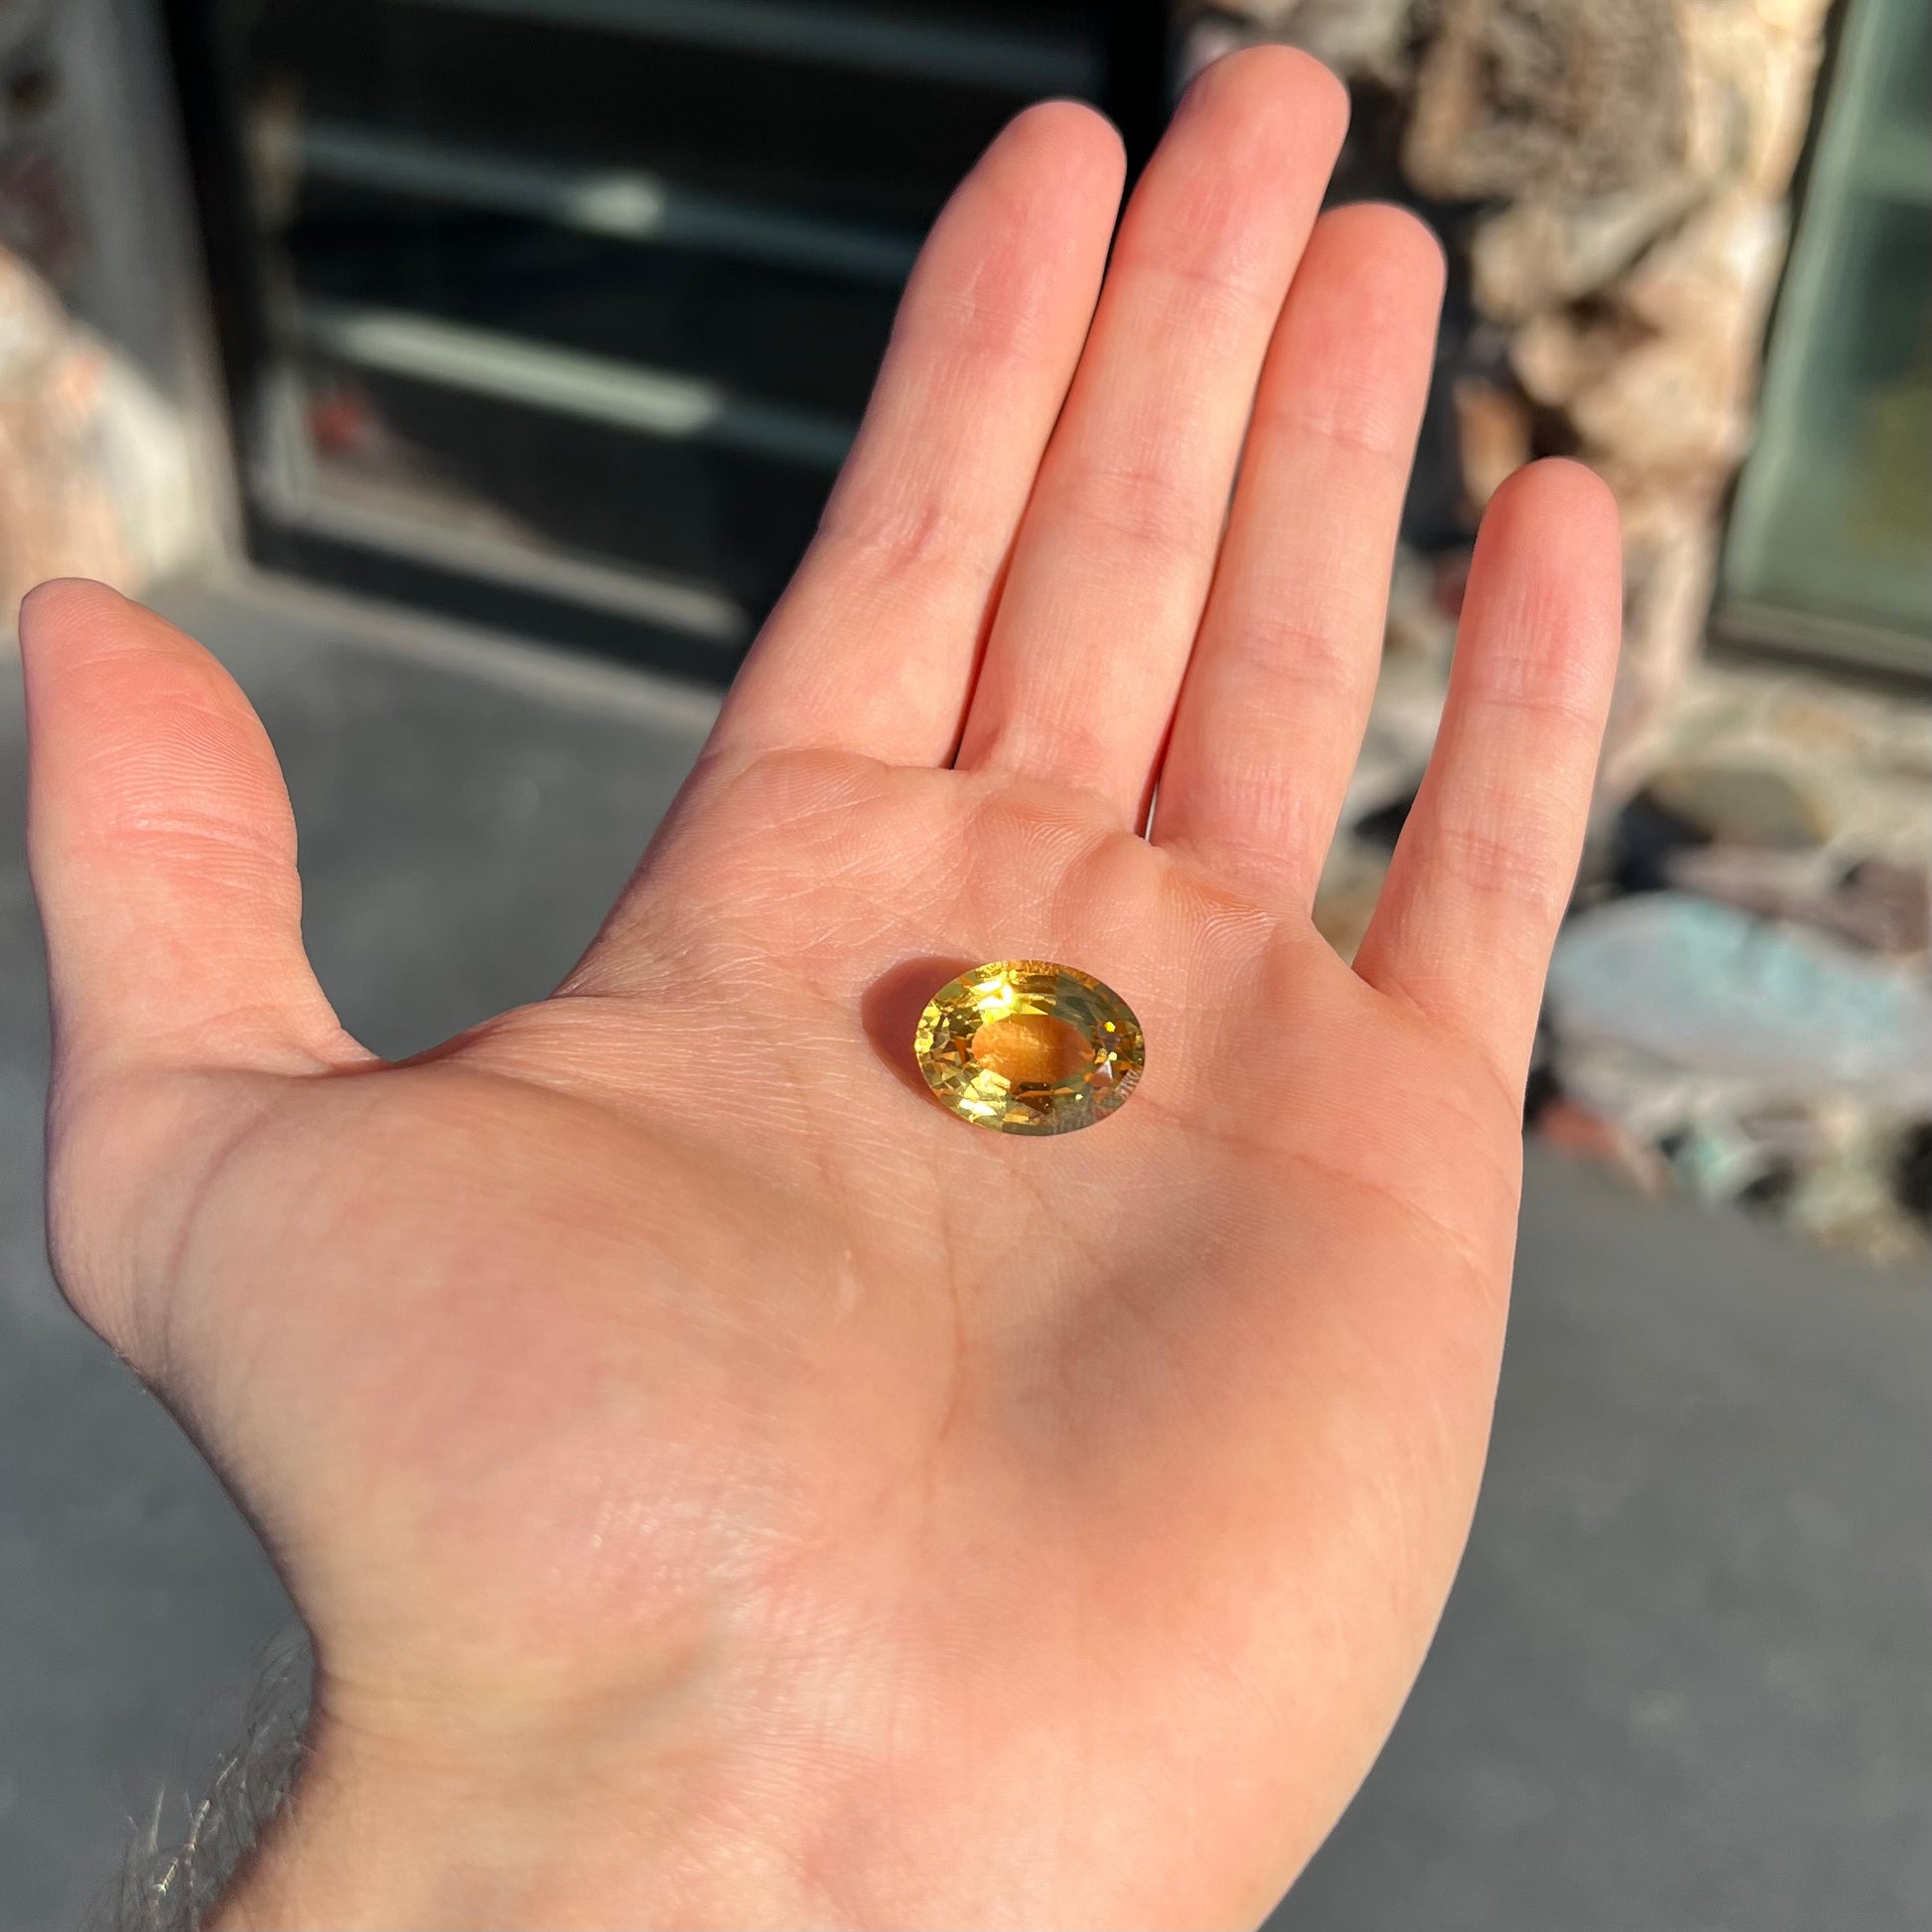 A loose, faceted oval cut golden beryl gemstone.